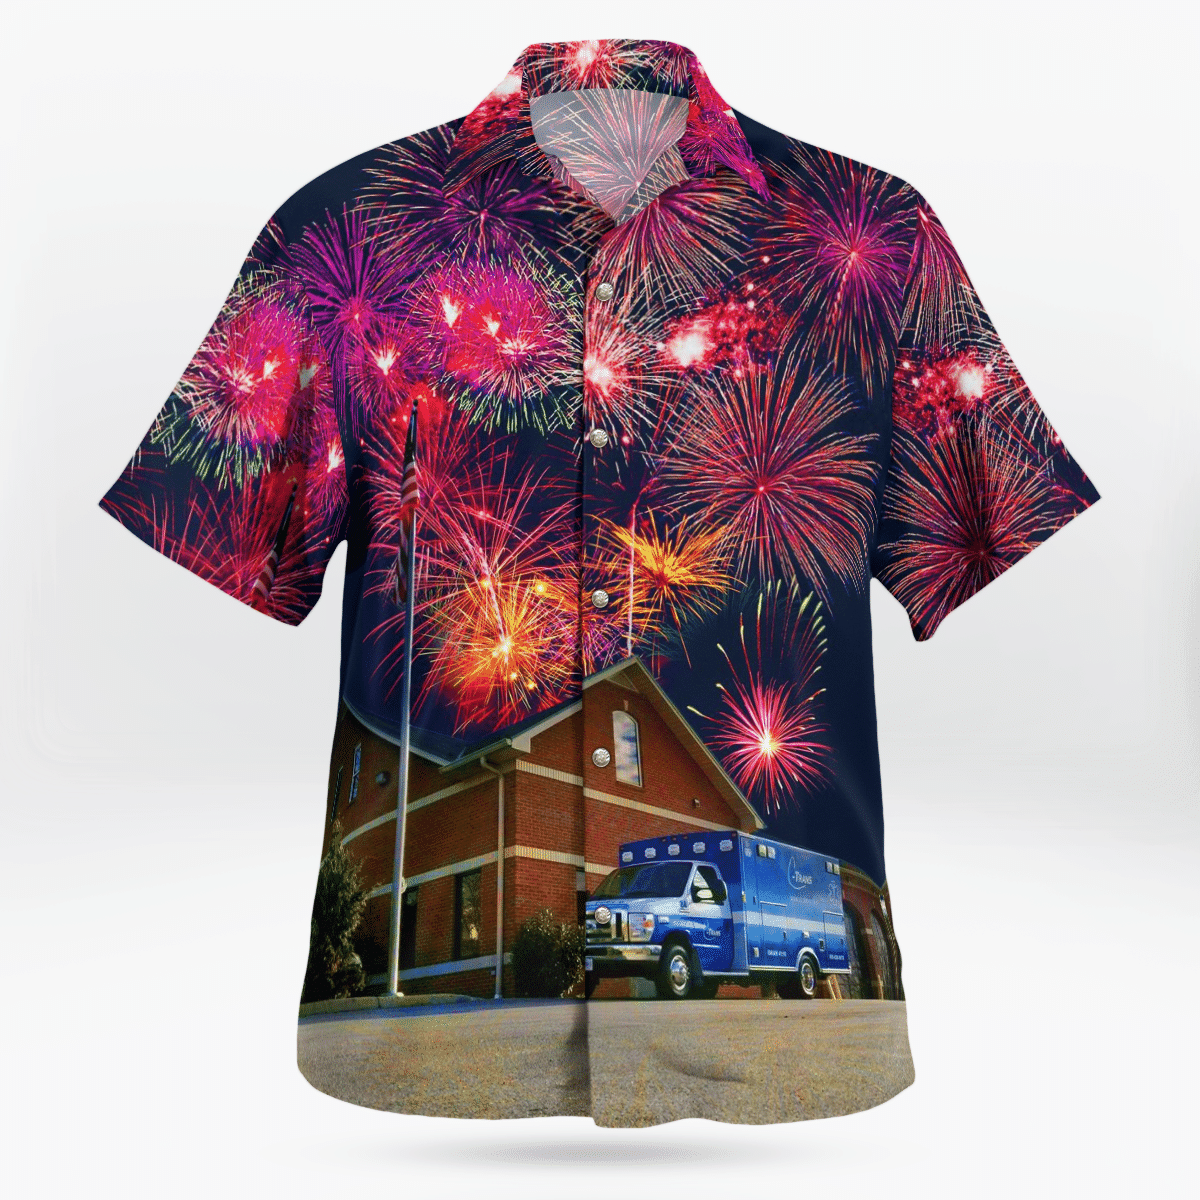 HOT Town of Abingdon, Virginia, C-Trans Medical Services, 4th of July Tropical Shirt1